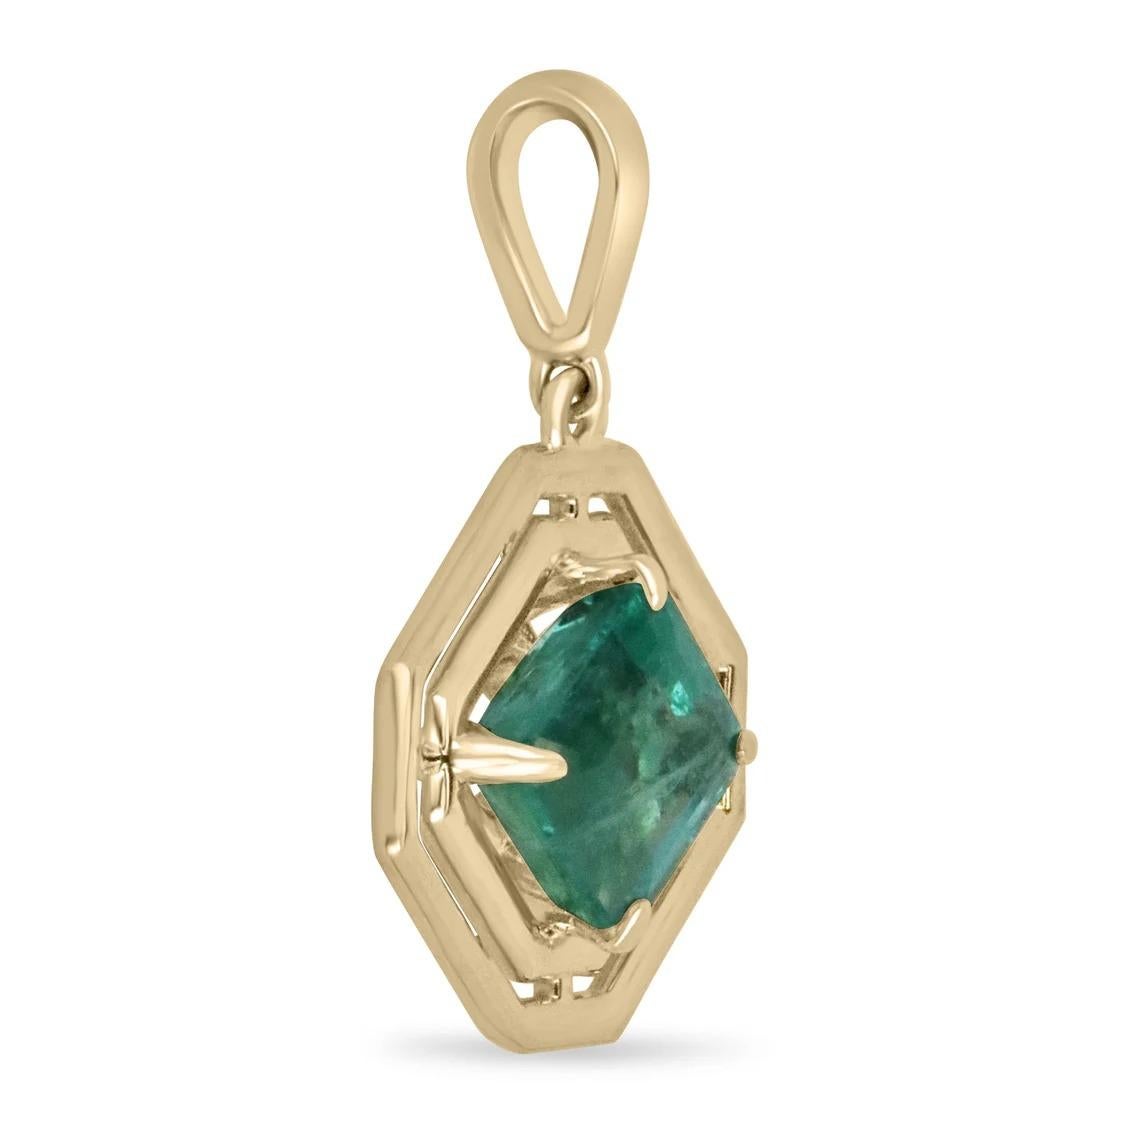 Featured is an absolutely stunning, and one-of-a-kind natural emerald pendant. The gemstone is a natural, 2.30-carat, Zambian asscher cut emerald with ravishing characteristics such as its lush, bluish-green color, very good transparency, luster,